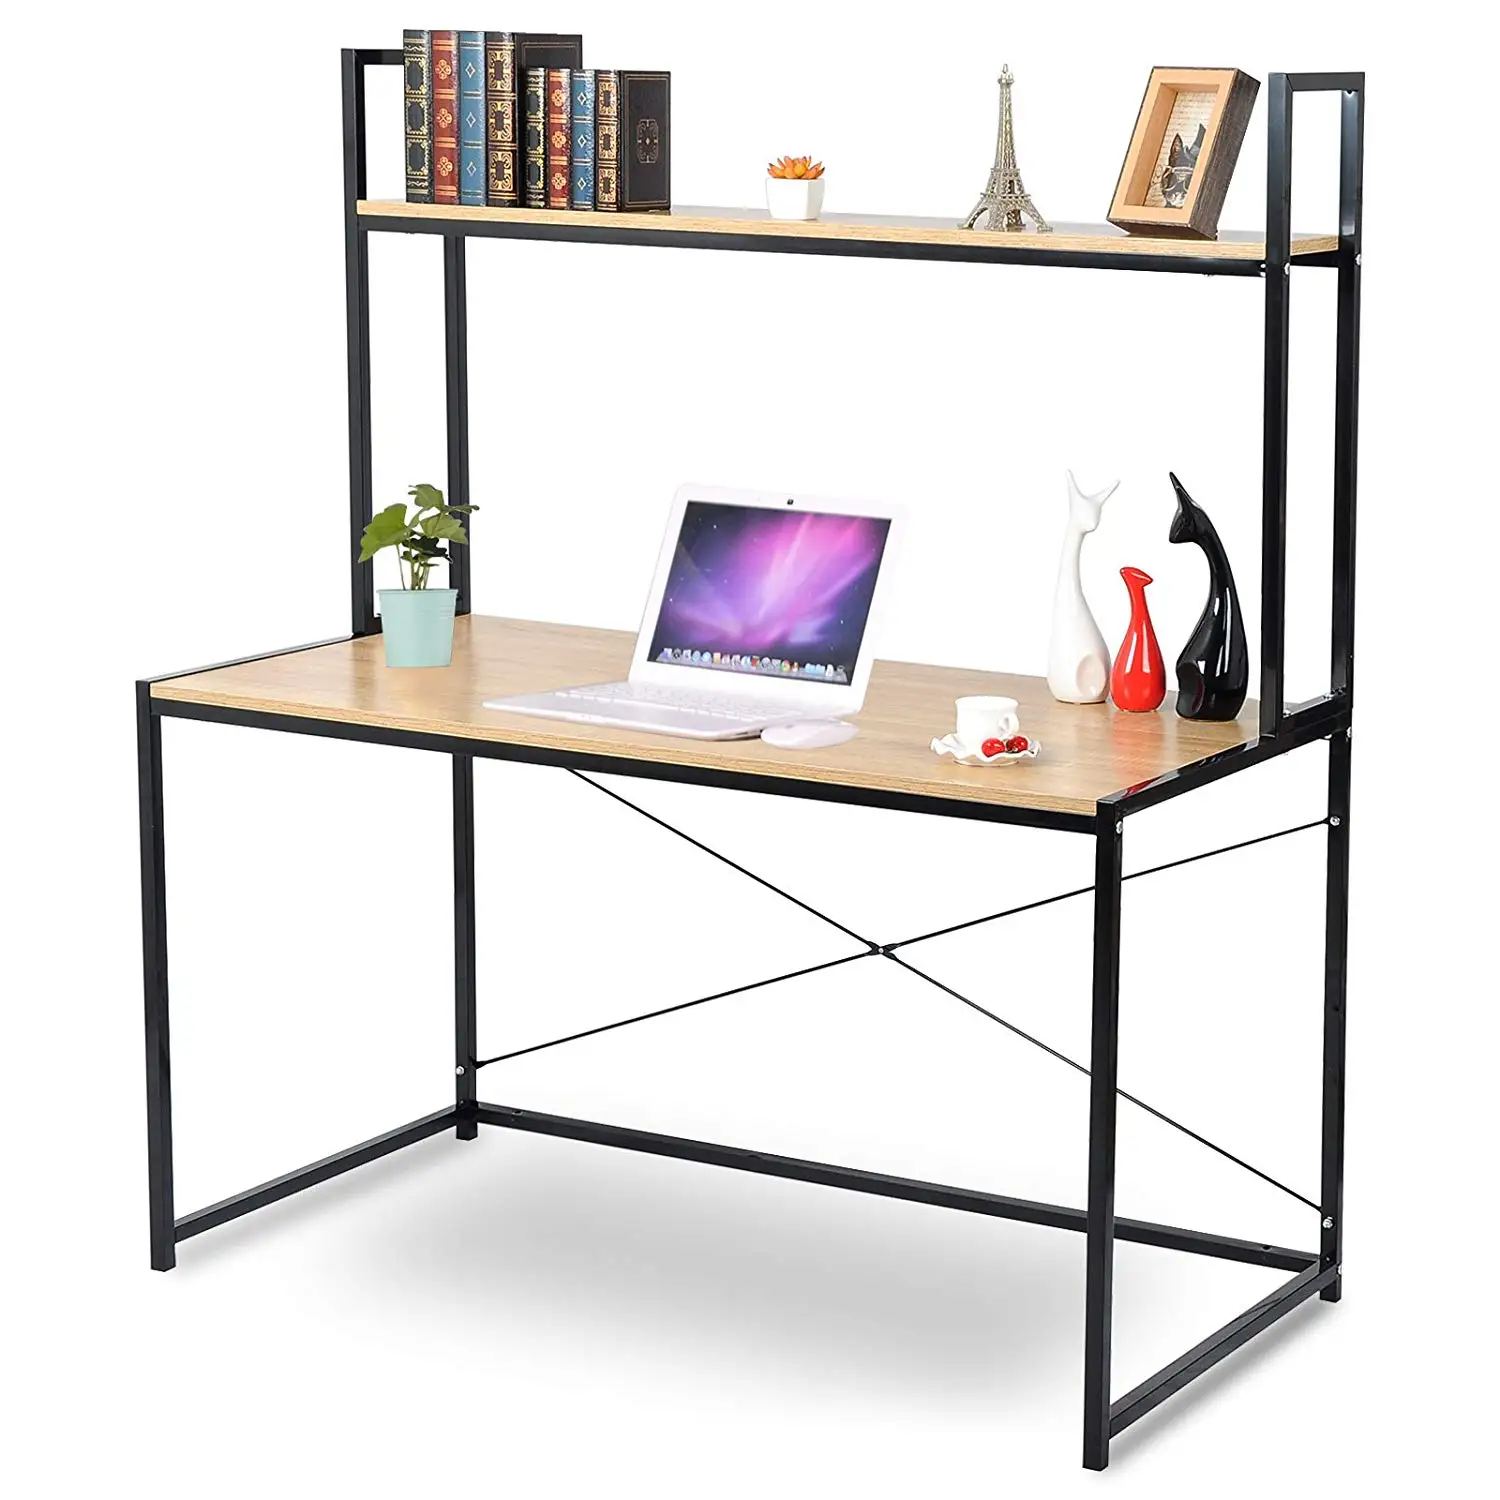 2 Tier Shelves Modern Home Office Desk Space Saving Computer Book Desk For Corner Use With Wooden Buy Computer Desk Shelves Home Office Desk Product On Alibaba Com